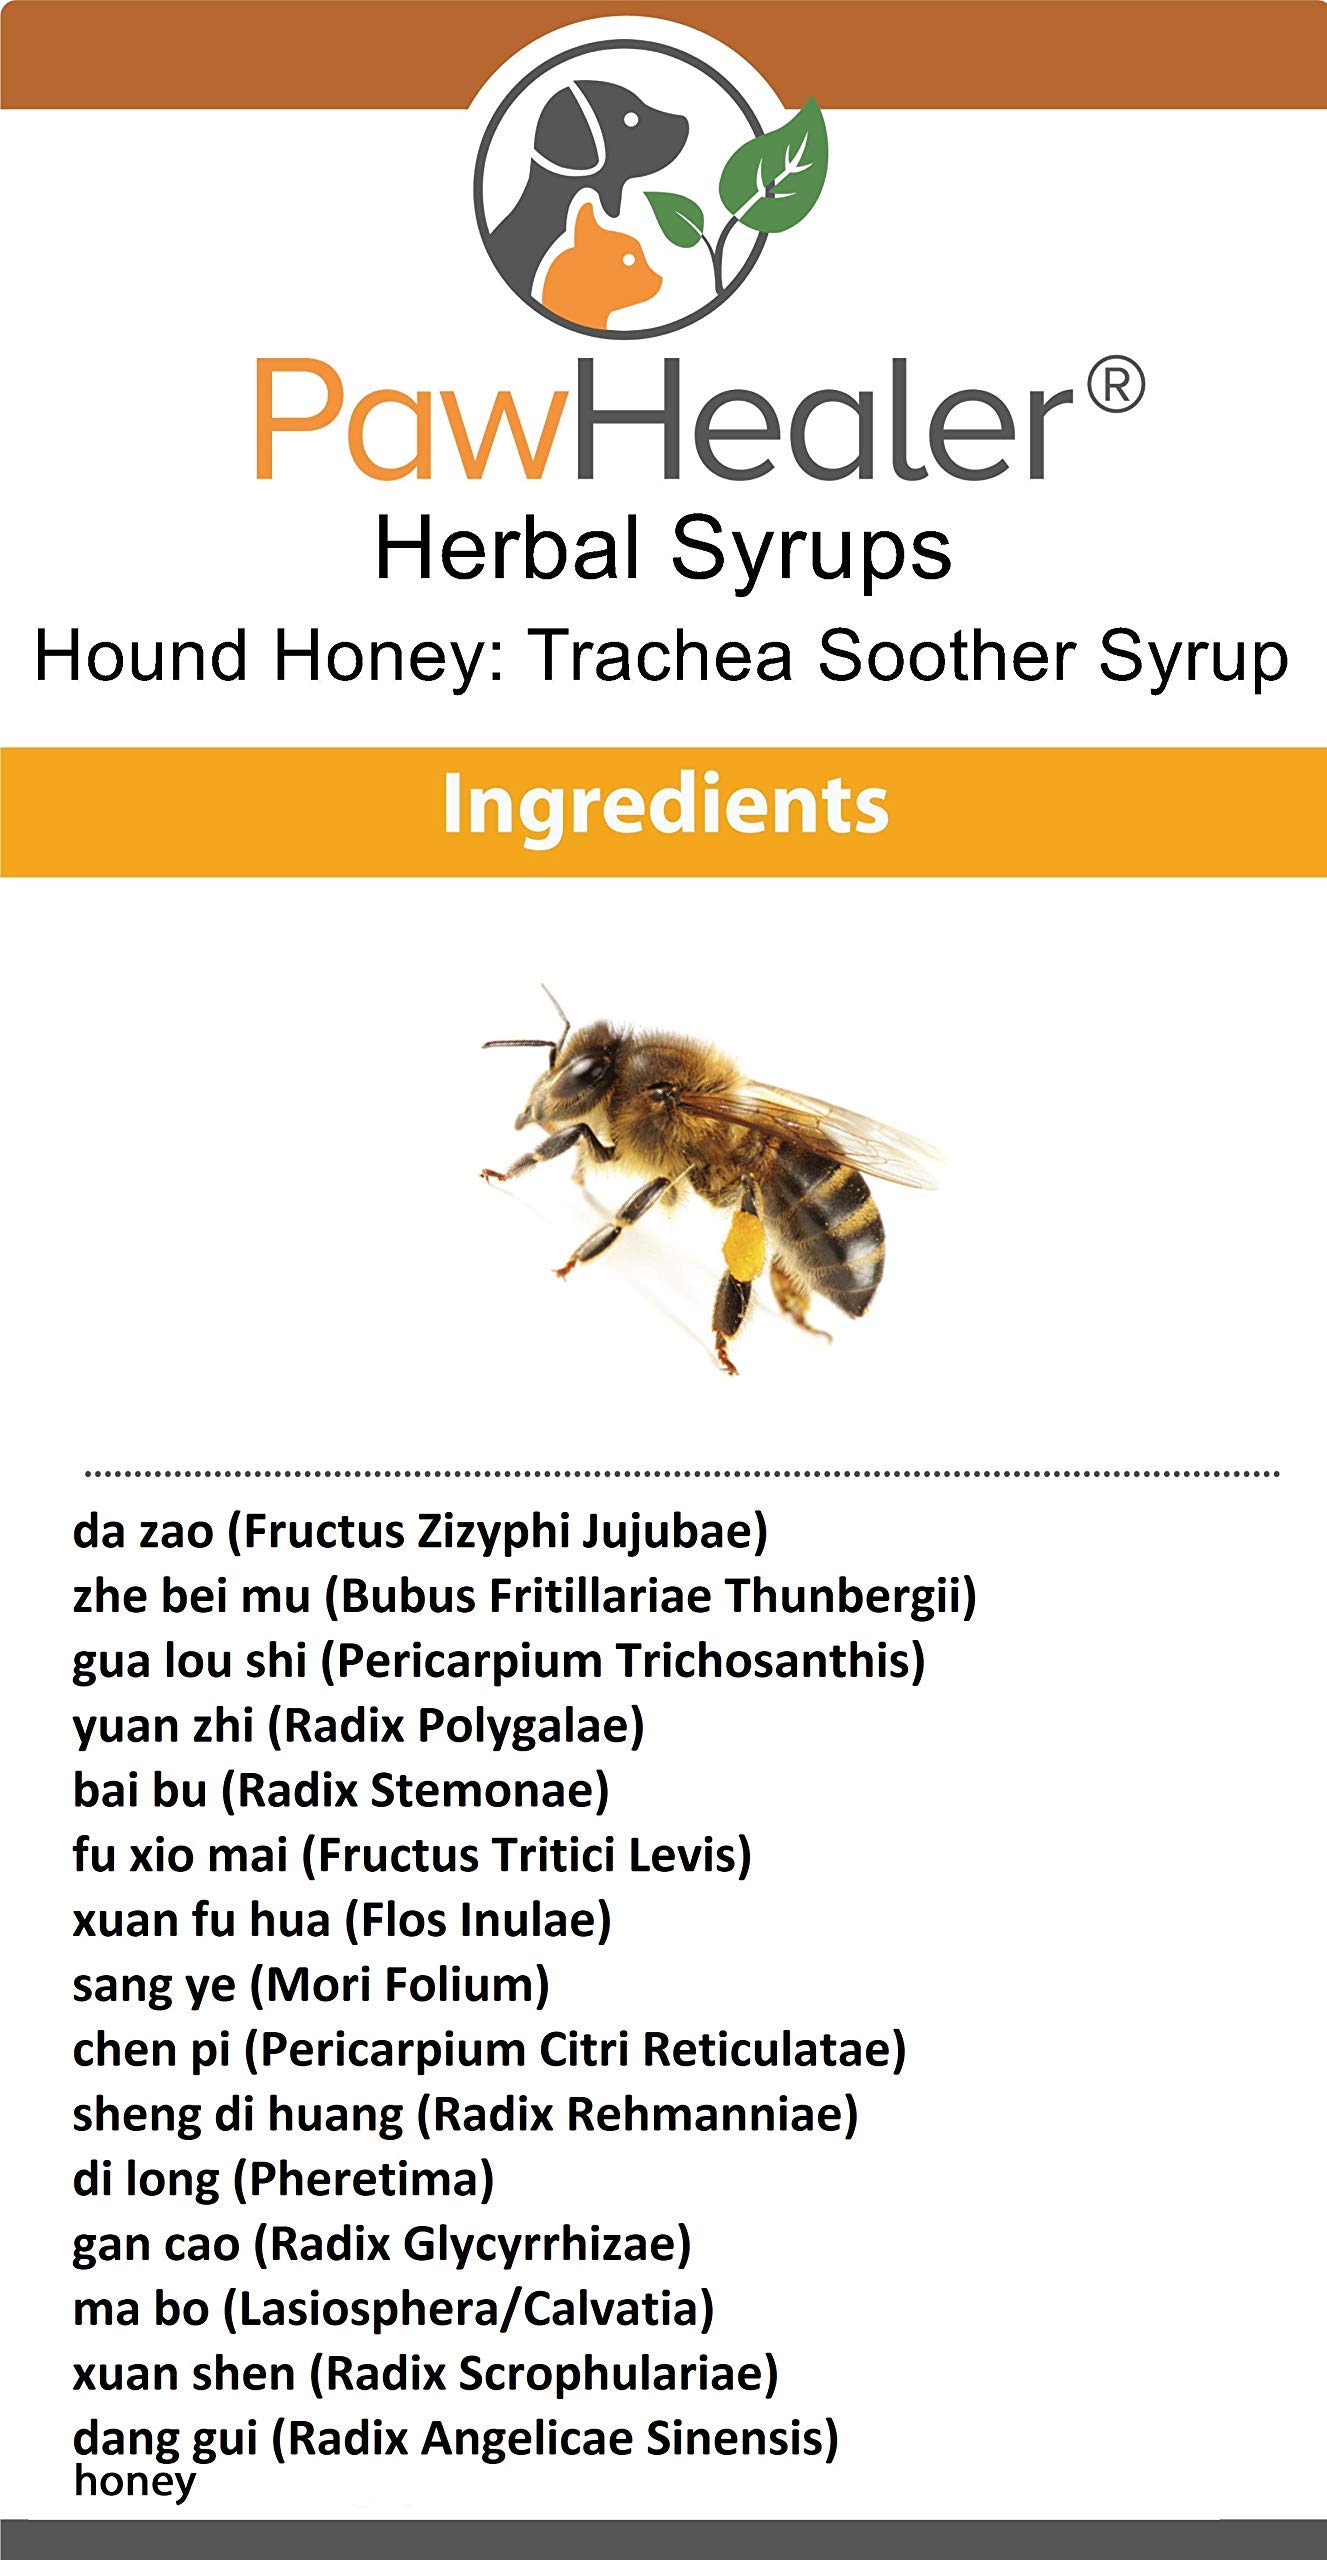 Trachea Soother Syrup 3PAK Hound Honey - Natural Herbal Remedy for Symptoms of Collapsed Trachea - Tastes Good - Easy to Administer (5 fl oz/ea) …